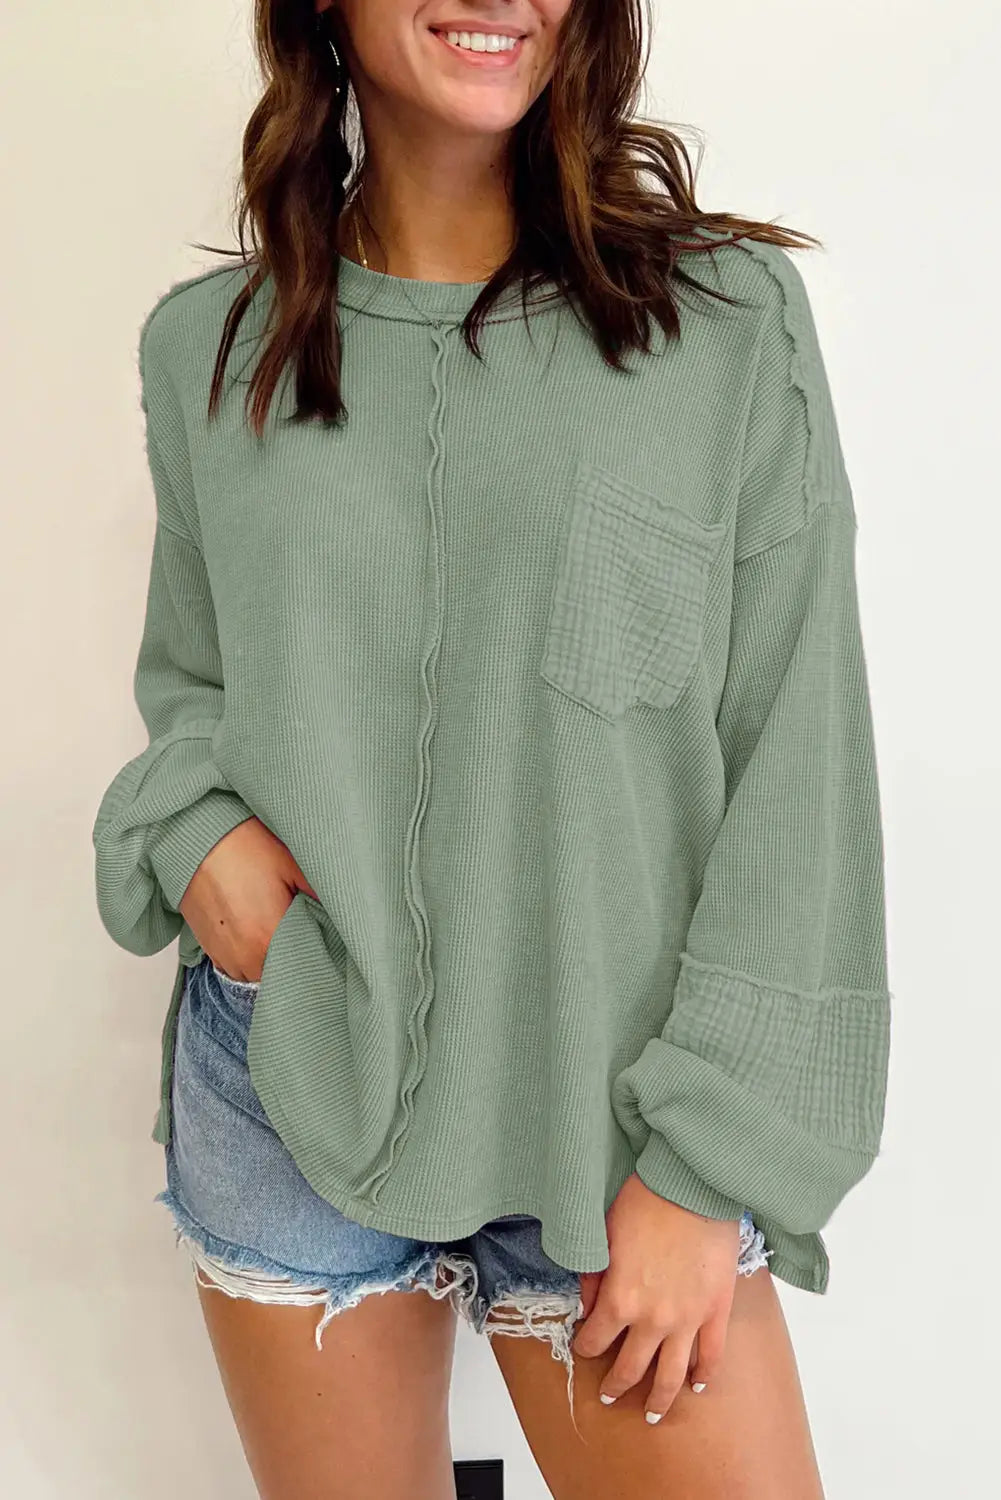 Black exposed seam patchwork bubble sleeve waffle knit top - laurel green / 2xl / 62.7% polyester + 37.3% cotton - tops